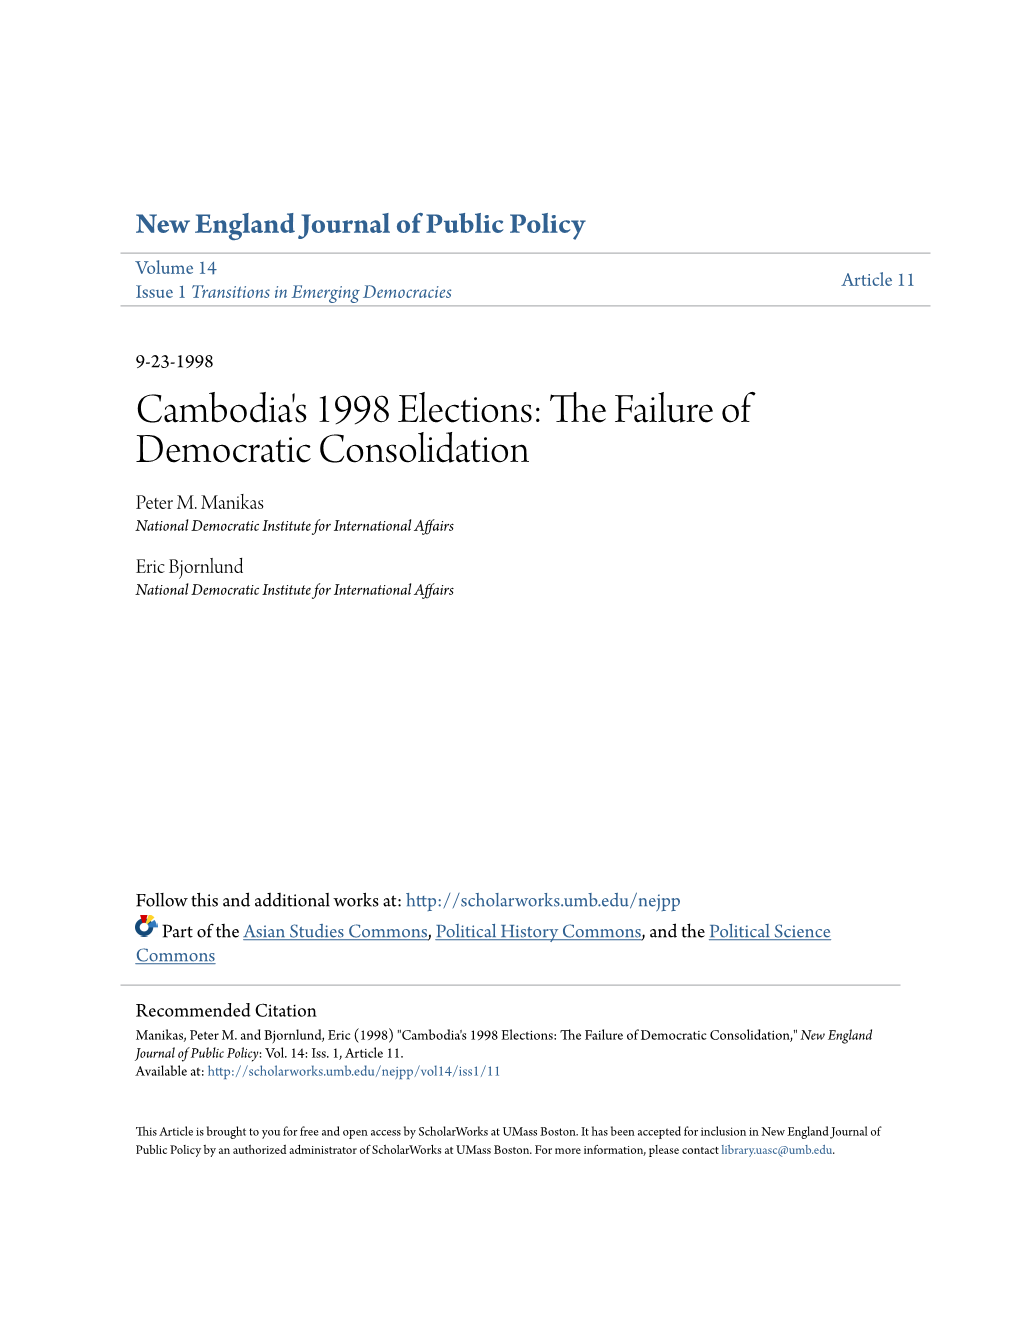 Cambodia's 1998 Elections: the Failure of Democratic Consolidation